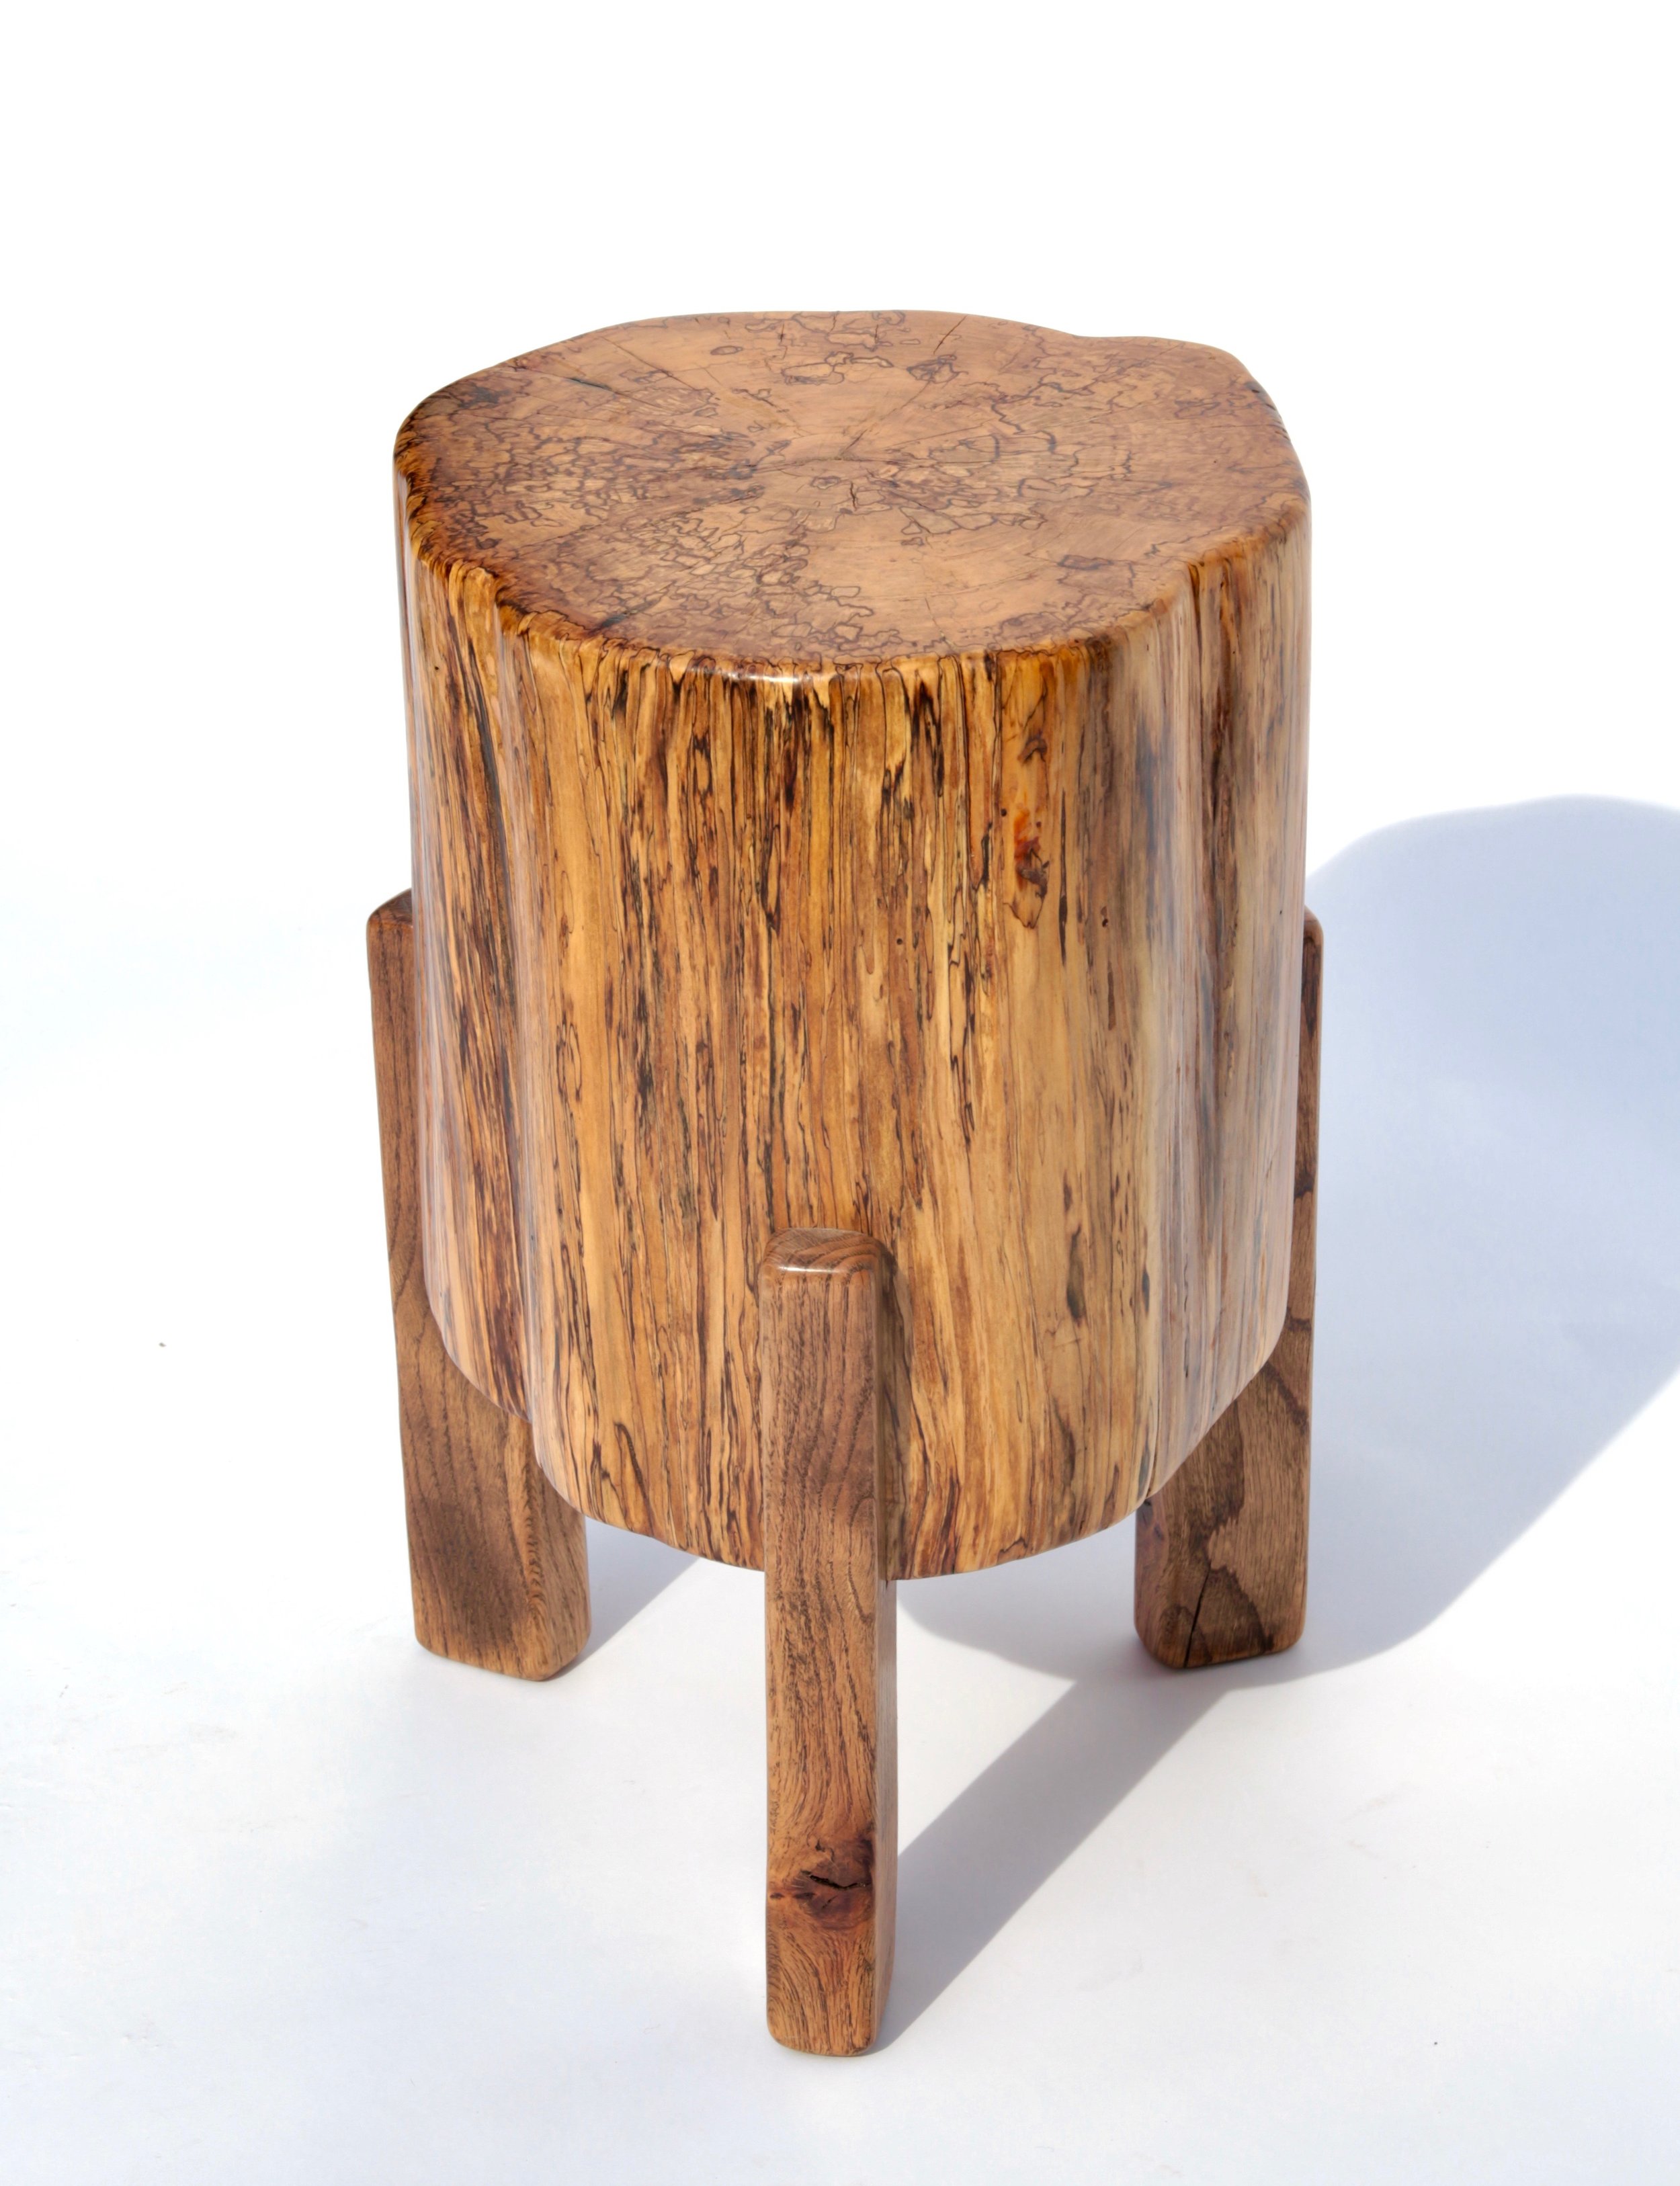 Small Stump Table (side view)